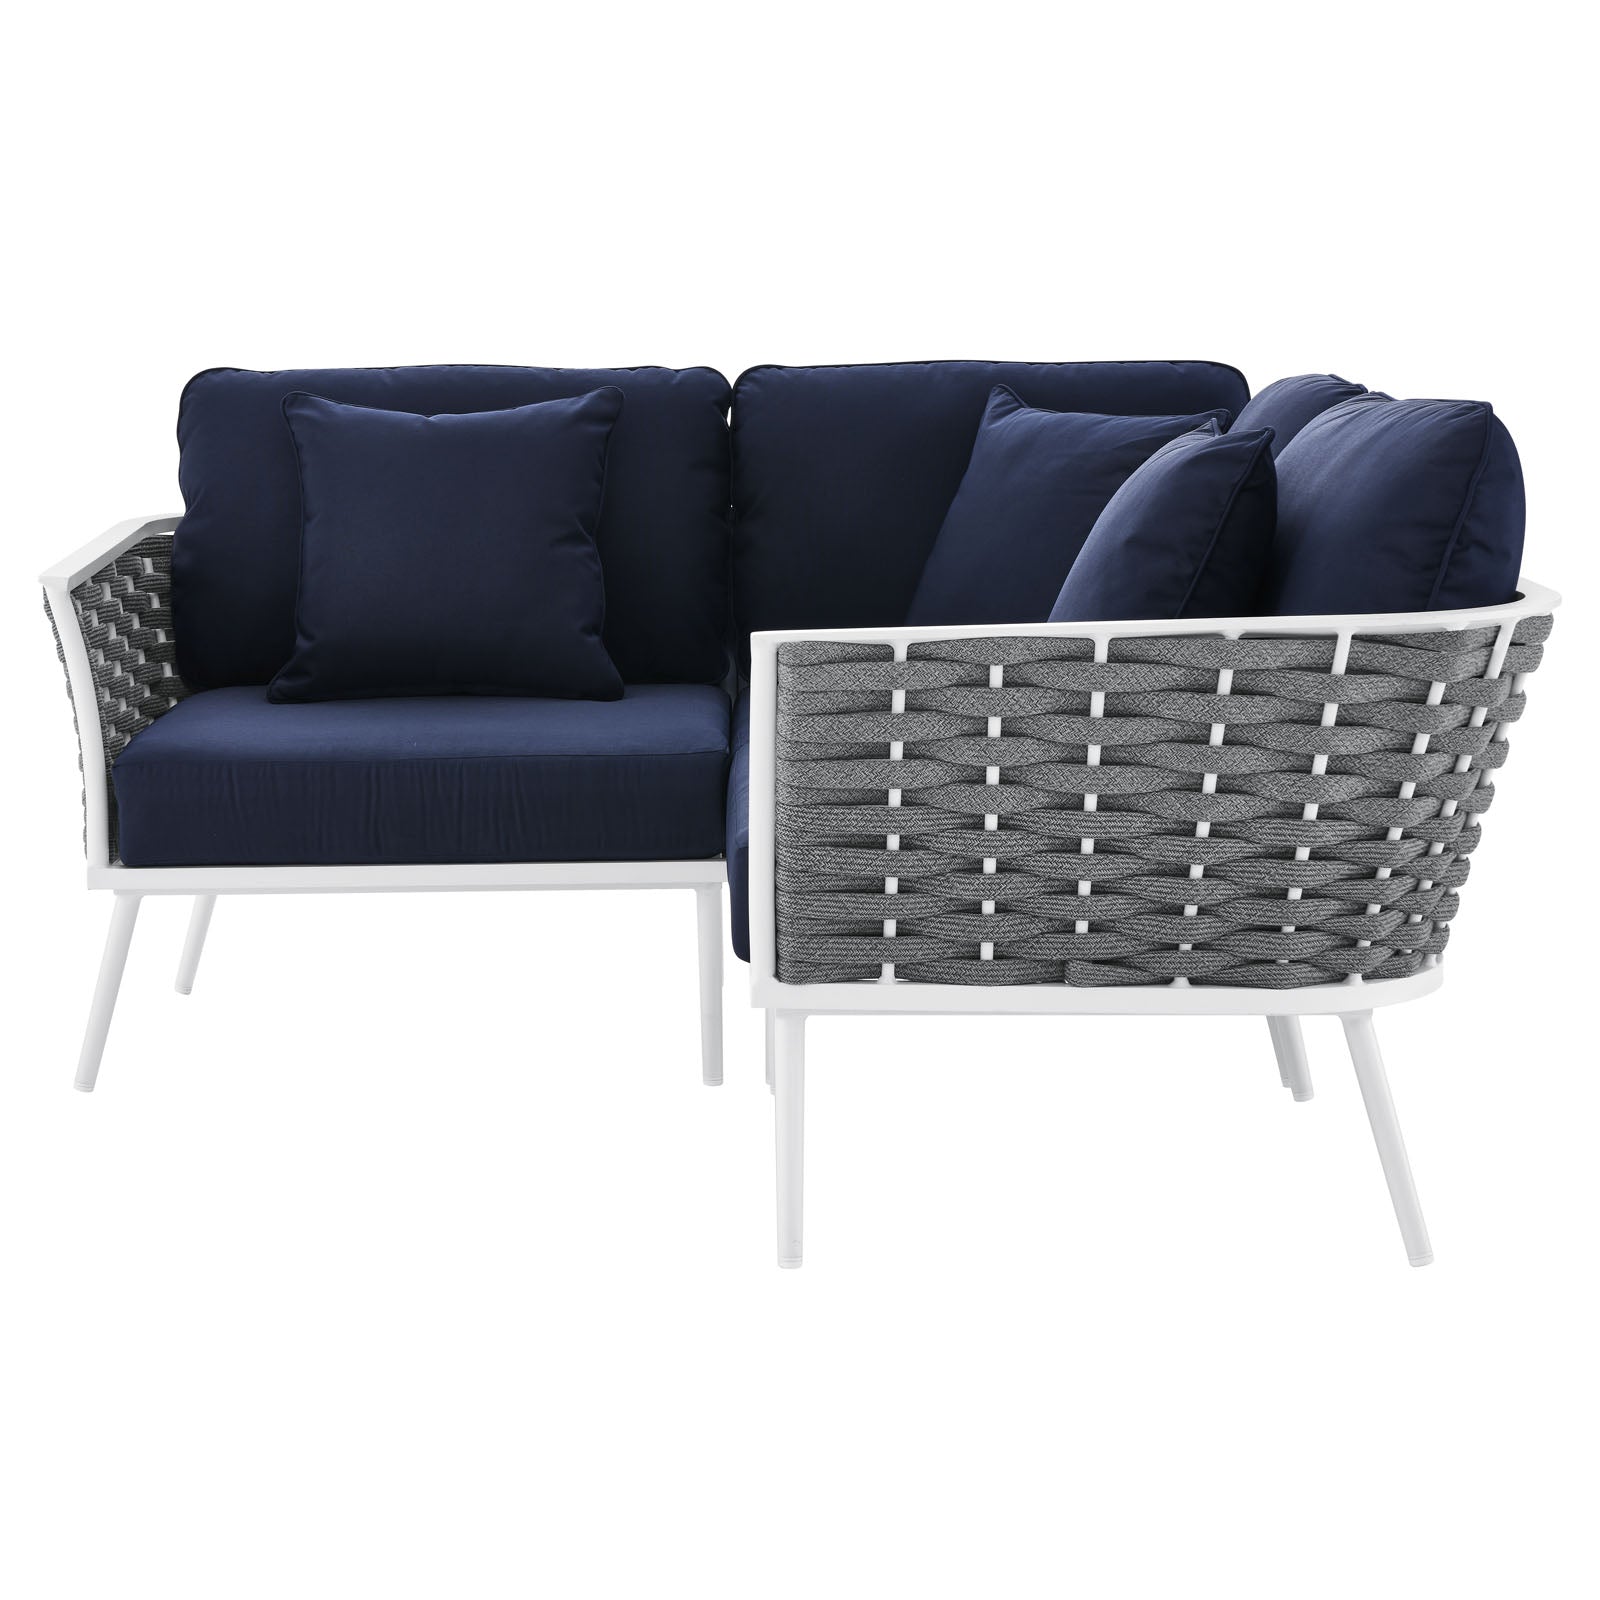 Stance Outdoor Patio Aluminum Small Sectional Sofa - East Shore Modern Home Furnishings